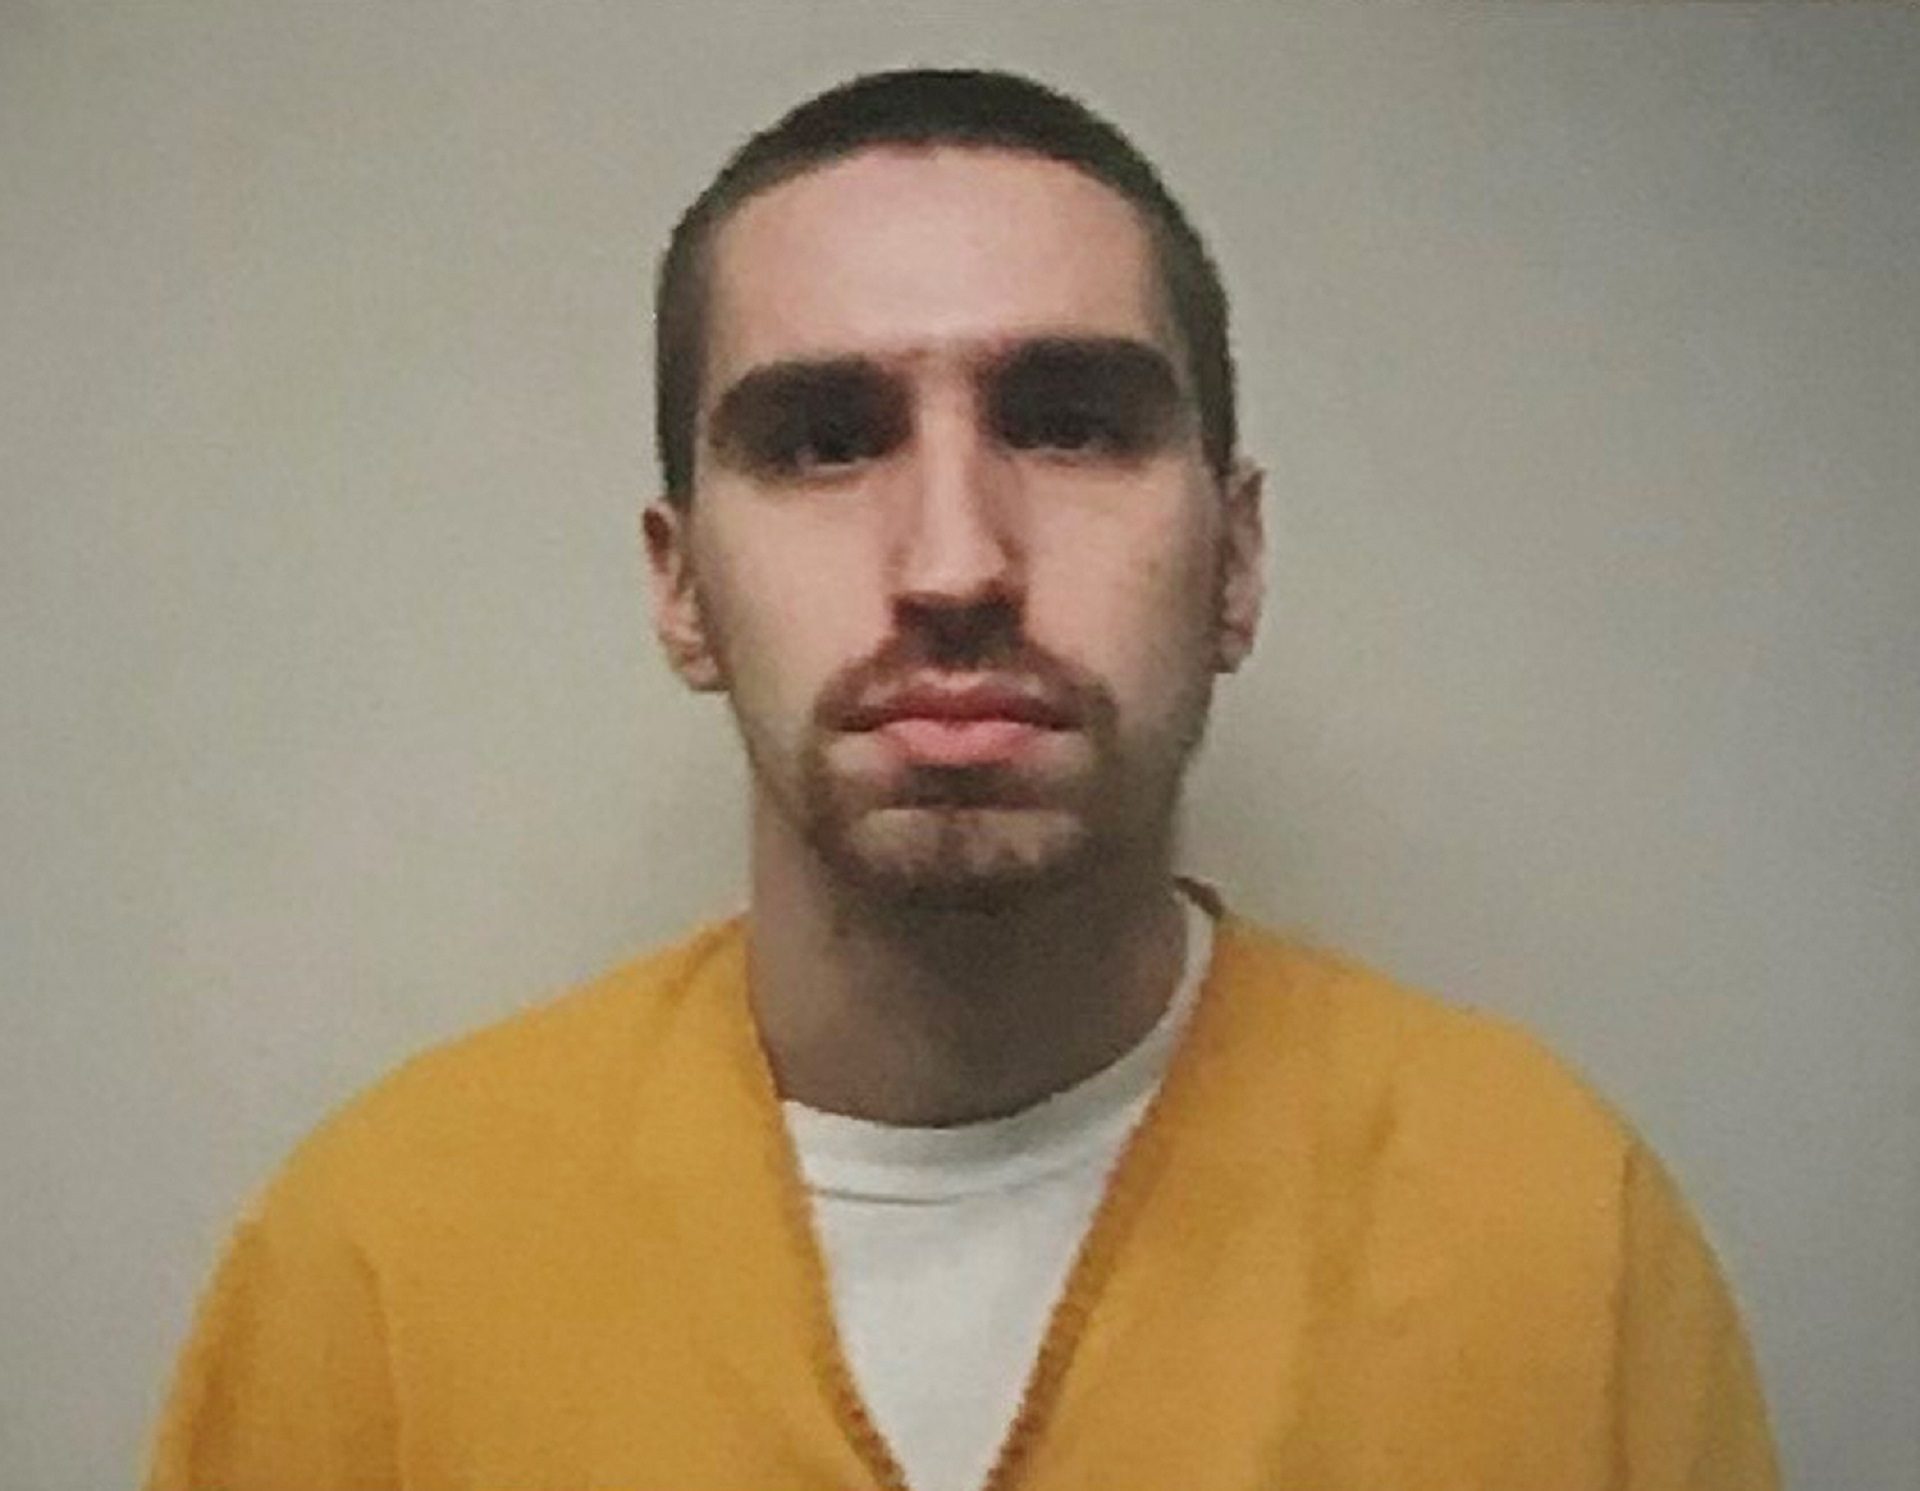 This undated photo provided by the U.S. Marshals shows Shawn Christy. Federal and local authorities are seeking the Pennsylvania man on allegations that he threatened several government officials, including President Trump. U.S. Marshals say authorities served a search warrant at the McAdoo home of Christy early Wednesday, June 20, 2018, but didn't find him.